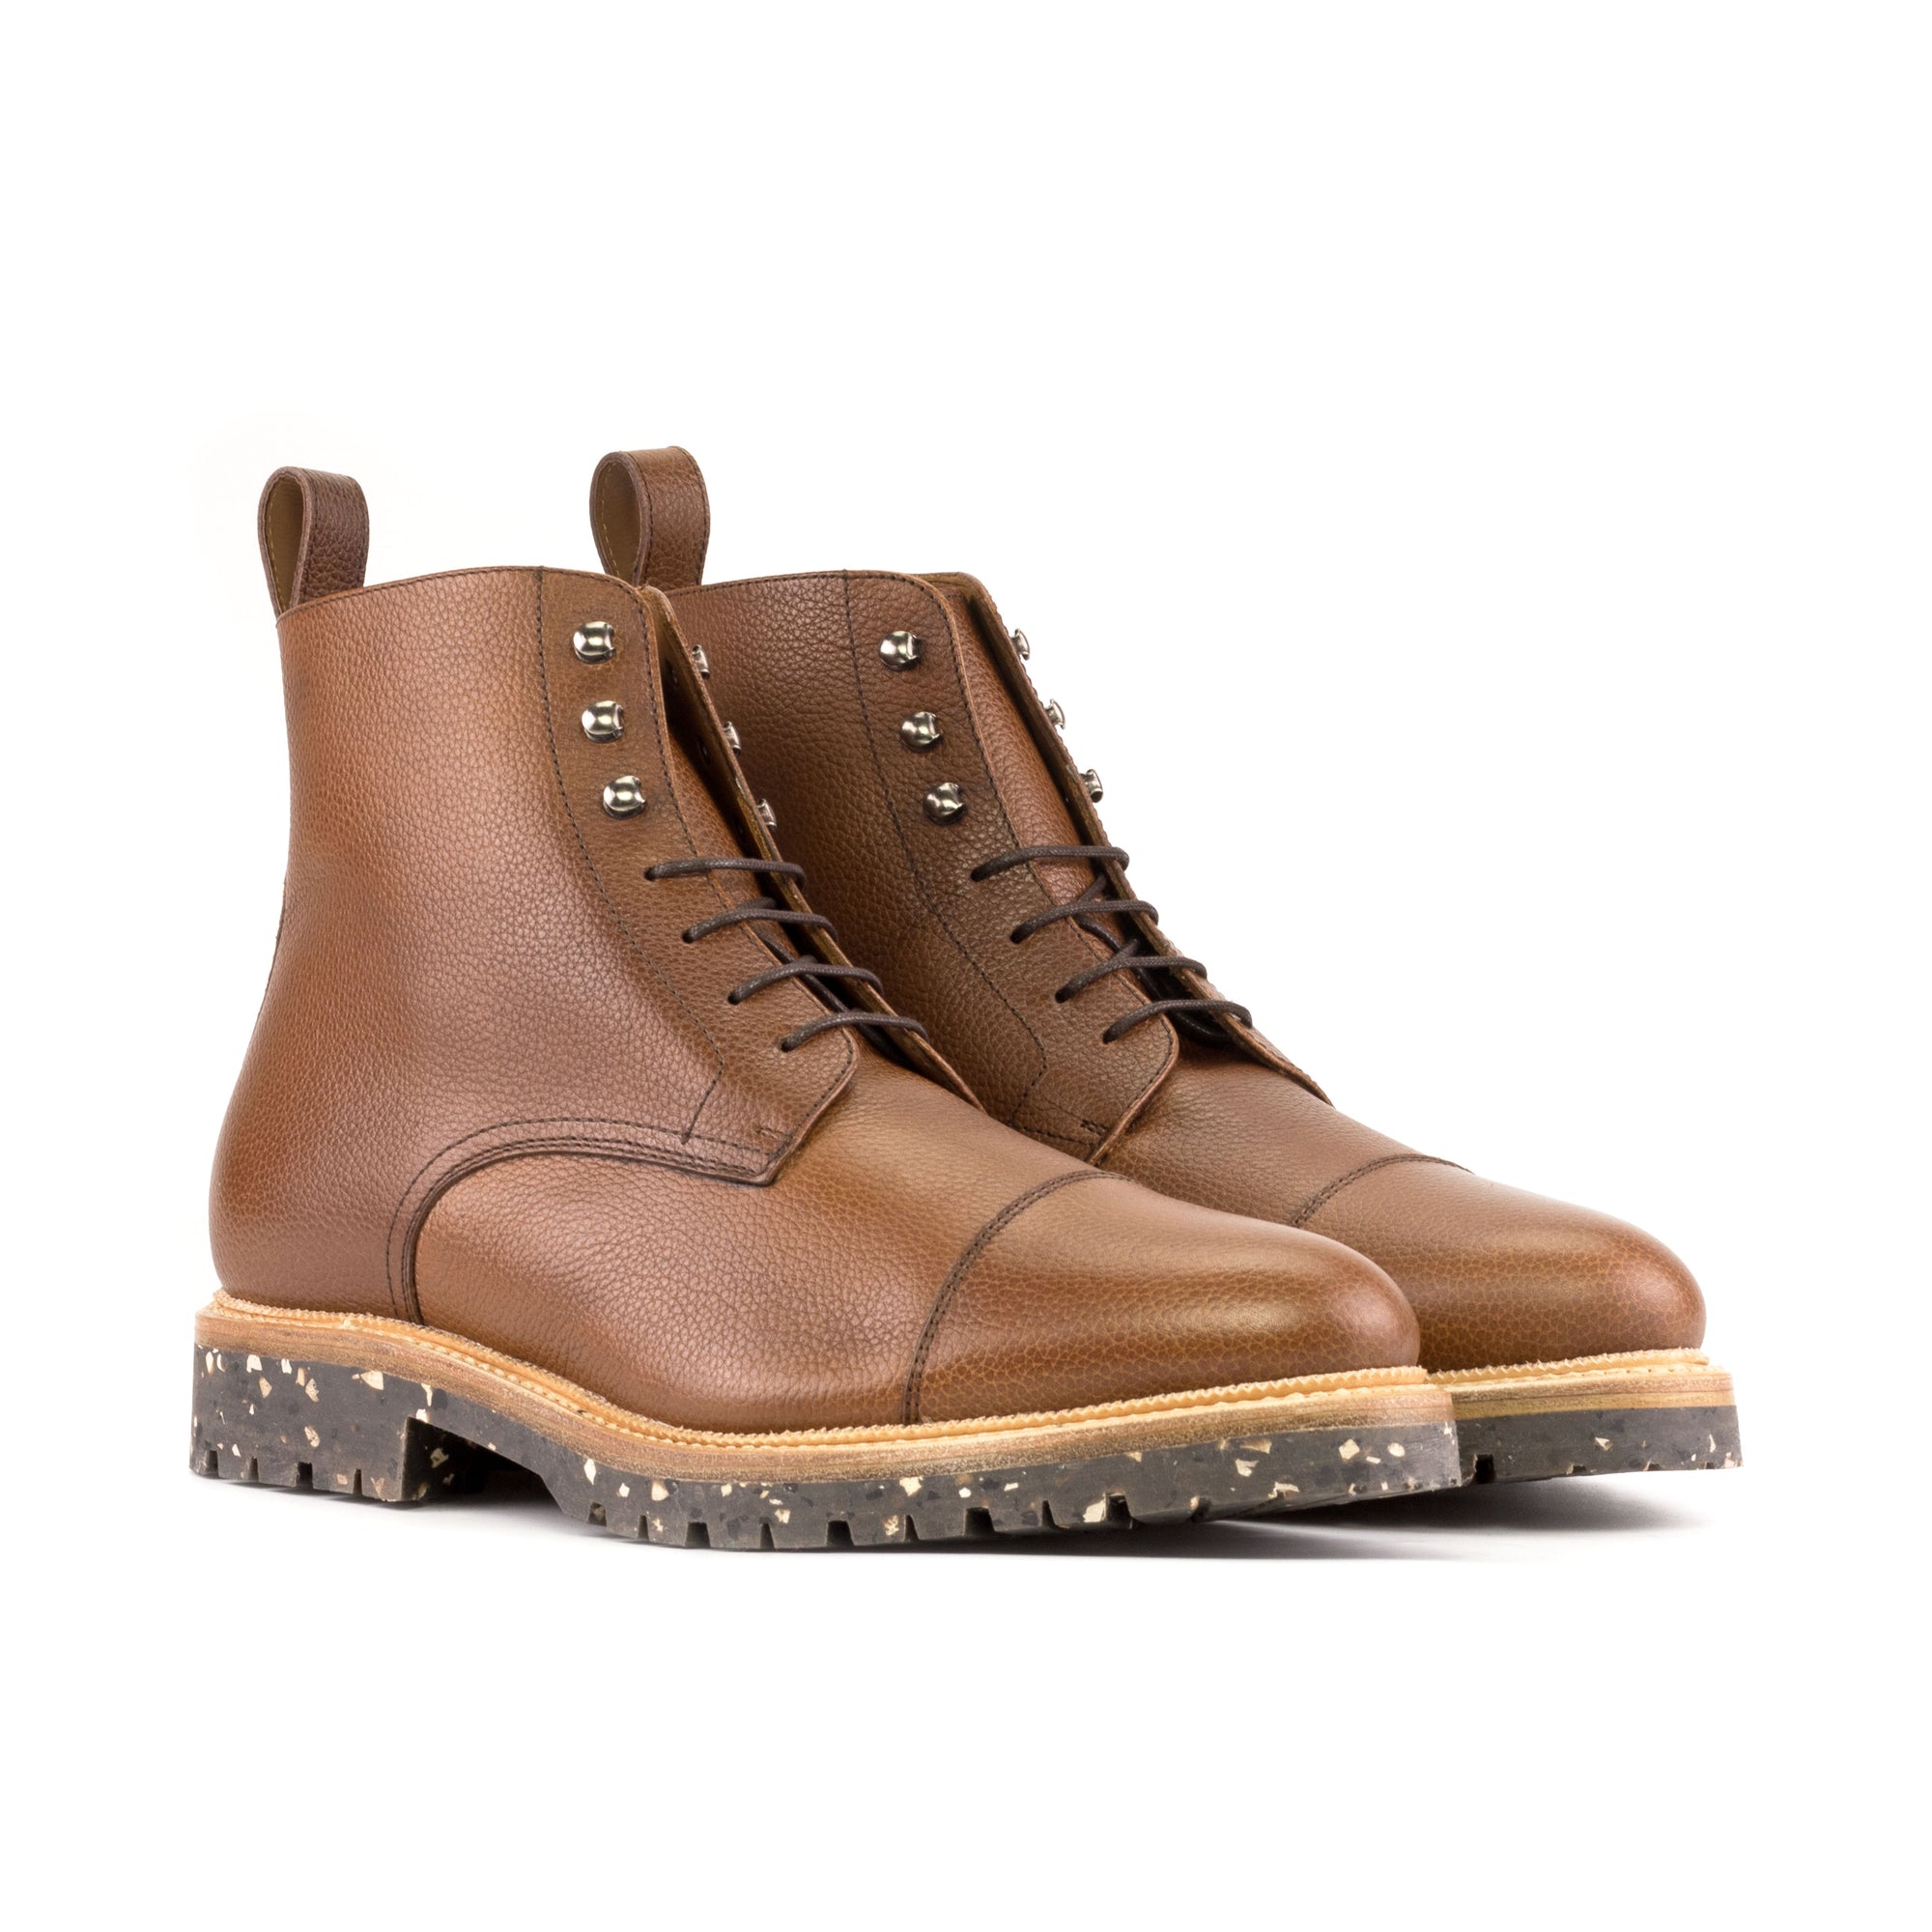 Whisky Brown Leather Combat Boots with Goodyear Welted Recycled Rubber sole